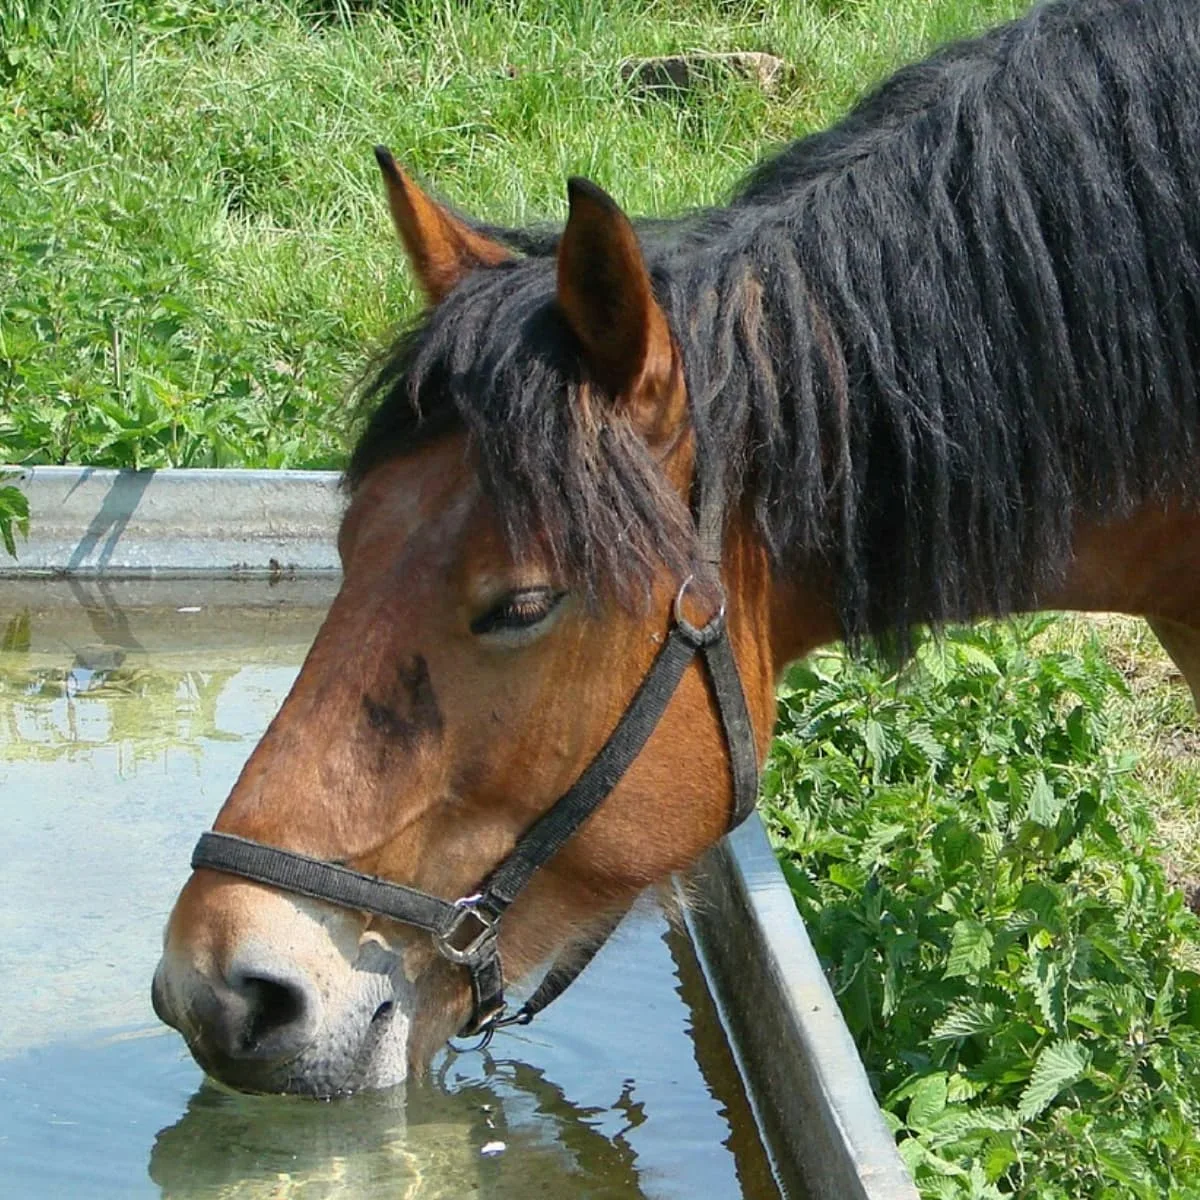 Simple tips to deep clean a horse trough and permanently reduce algae and mosquitoes